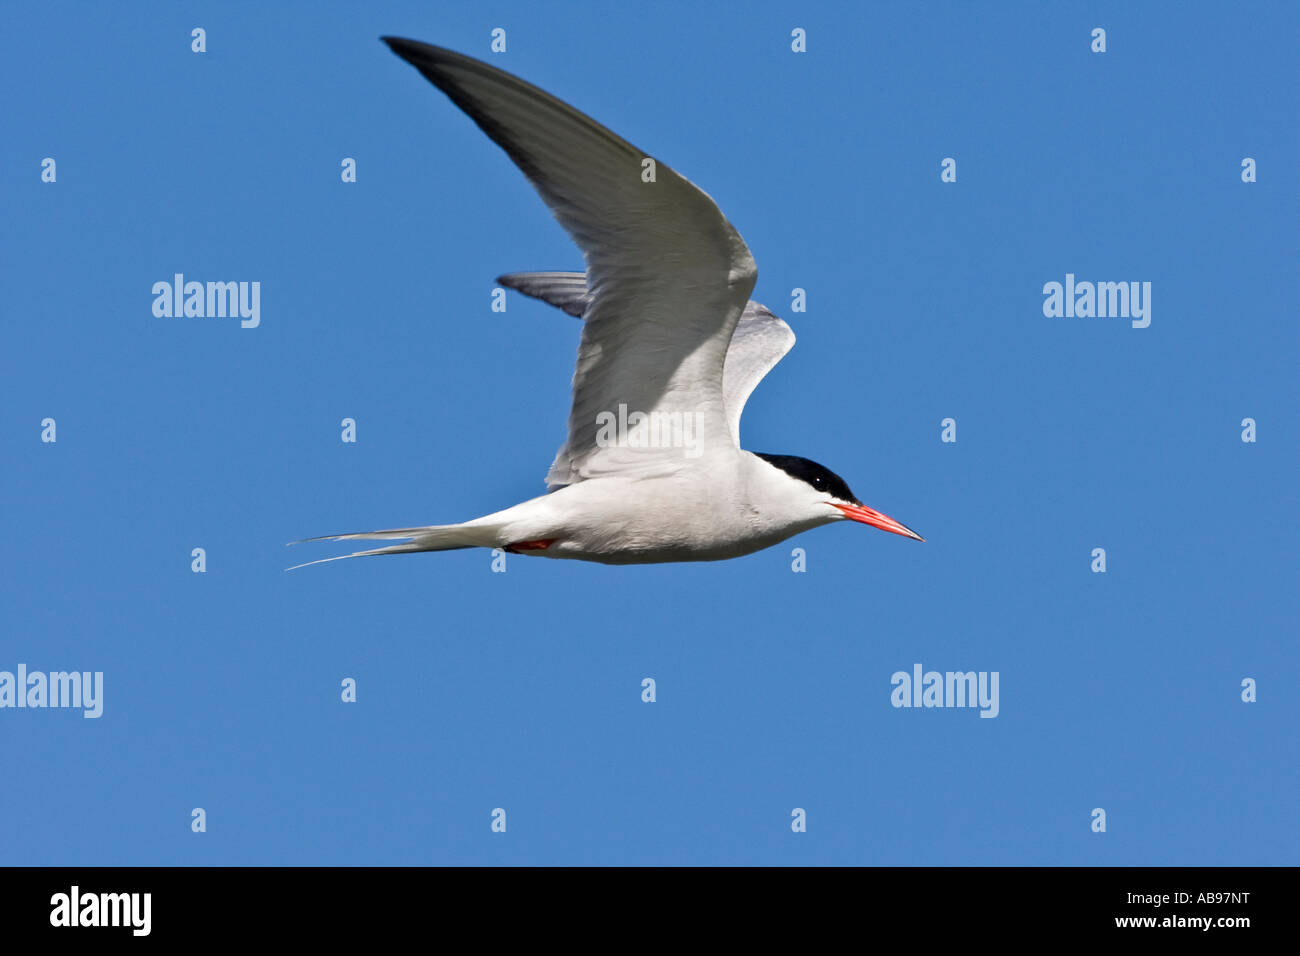 Common Tern Sterna hirundo in flight wings out with blue sky background Priory park Bedford Bedfordshire Stock Photo